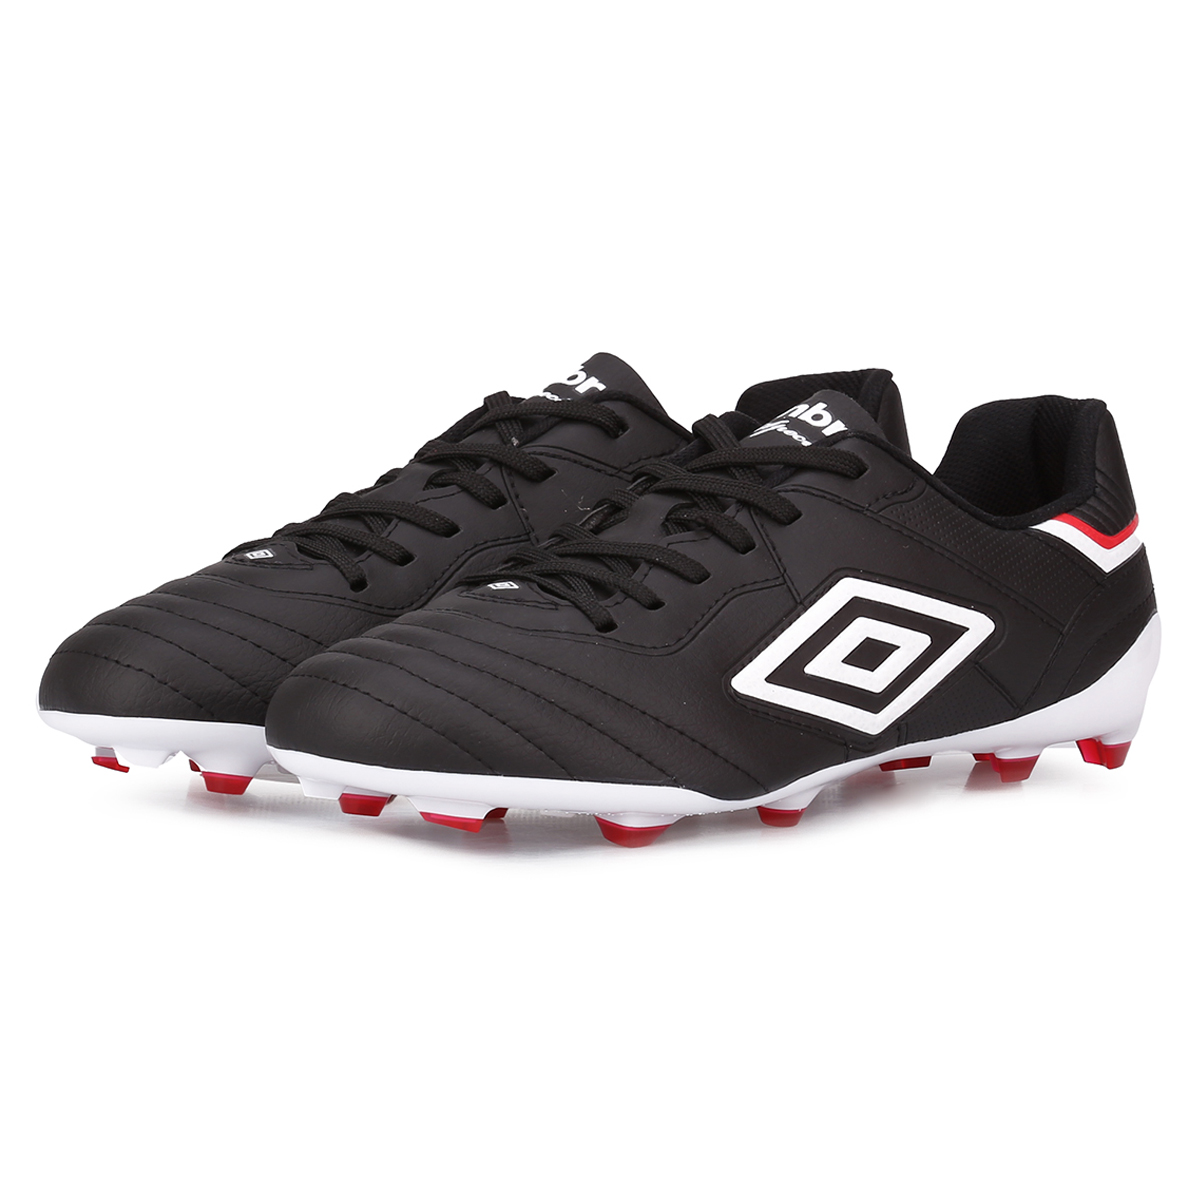 Botines Umbro Campo Speciali III League,  image number null